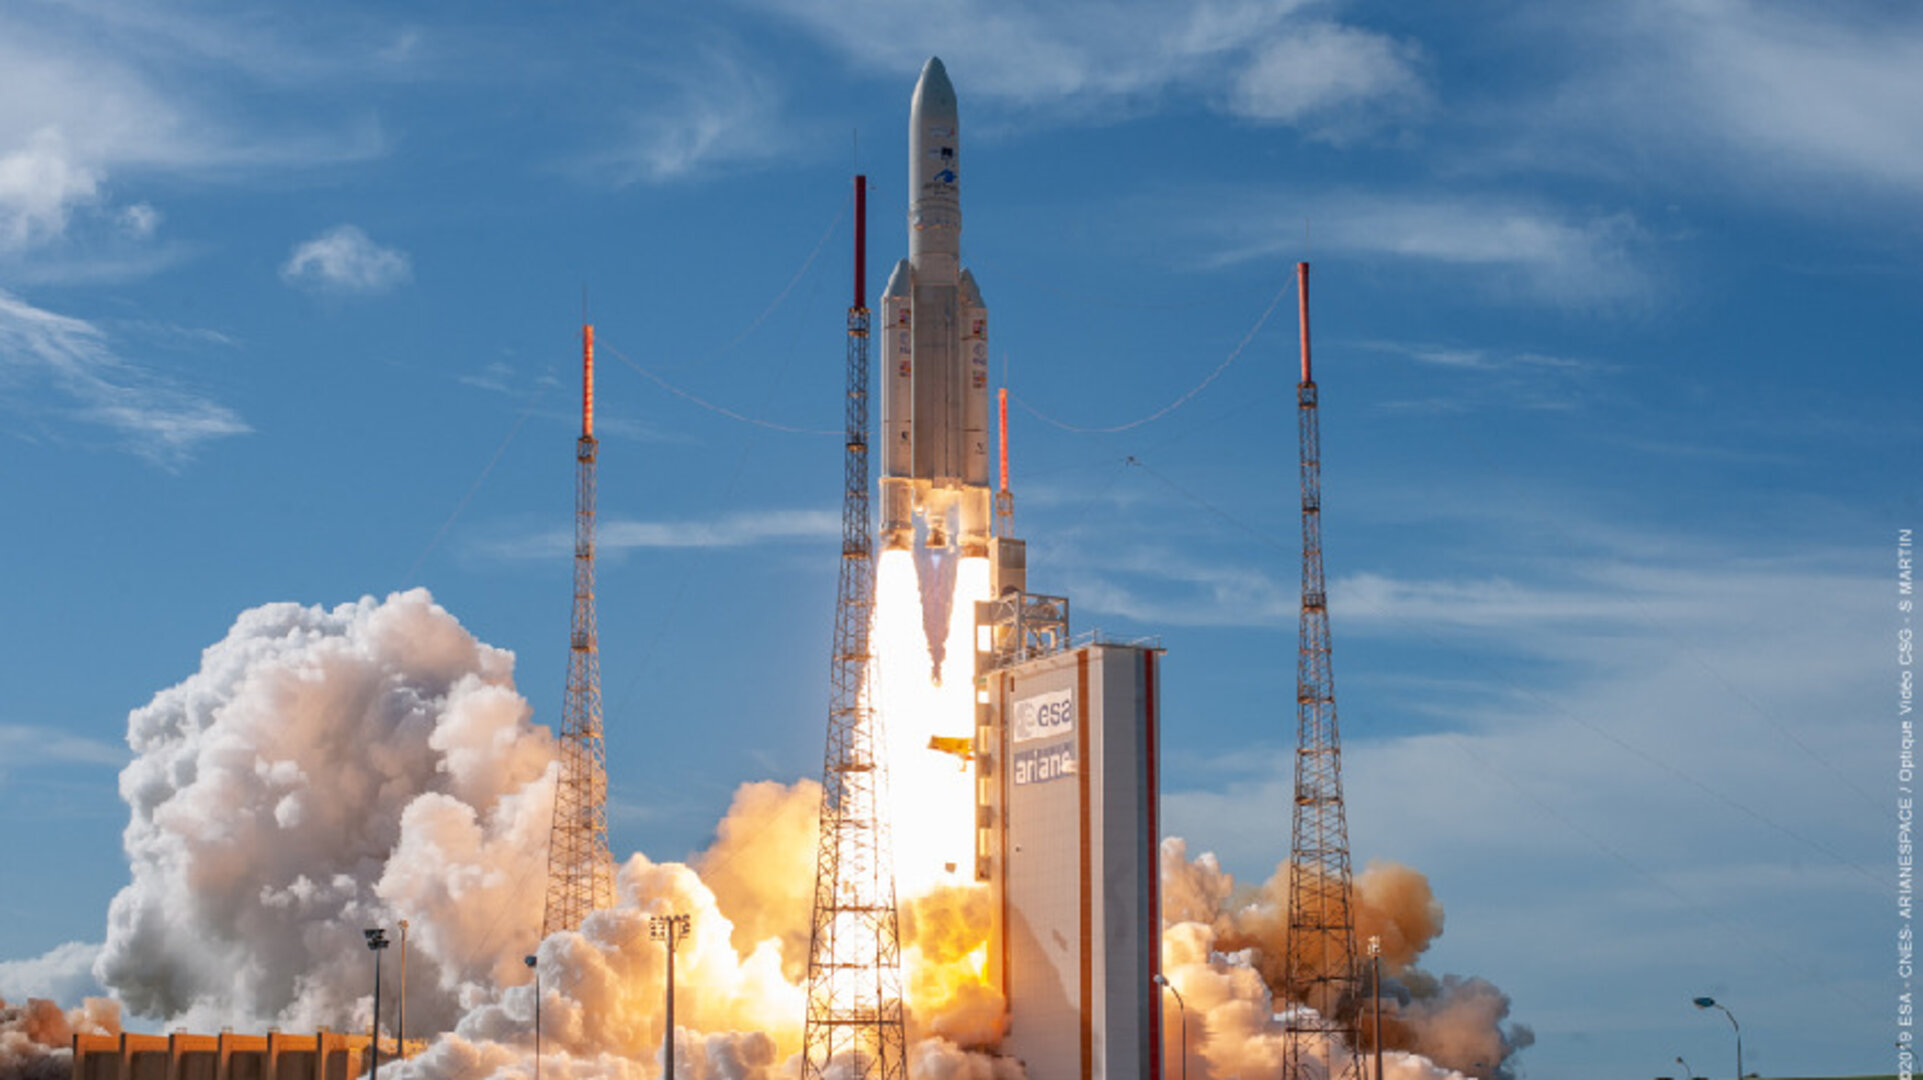 The EDRS-C satellite was launched aboard an Ariane 5